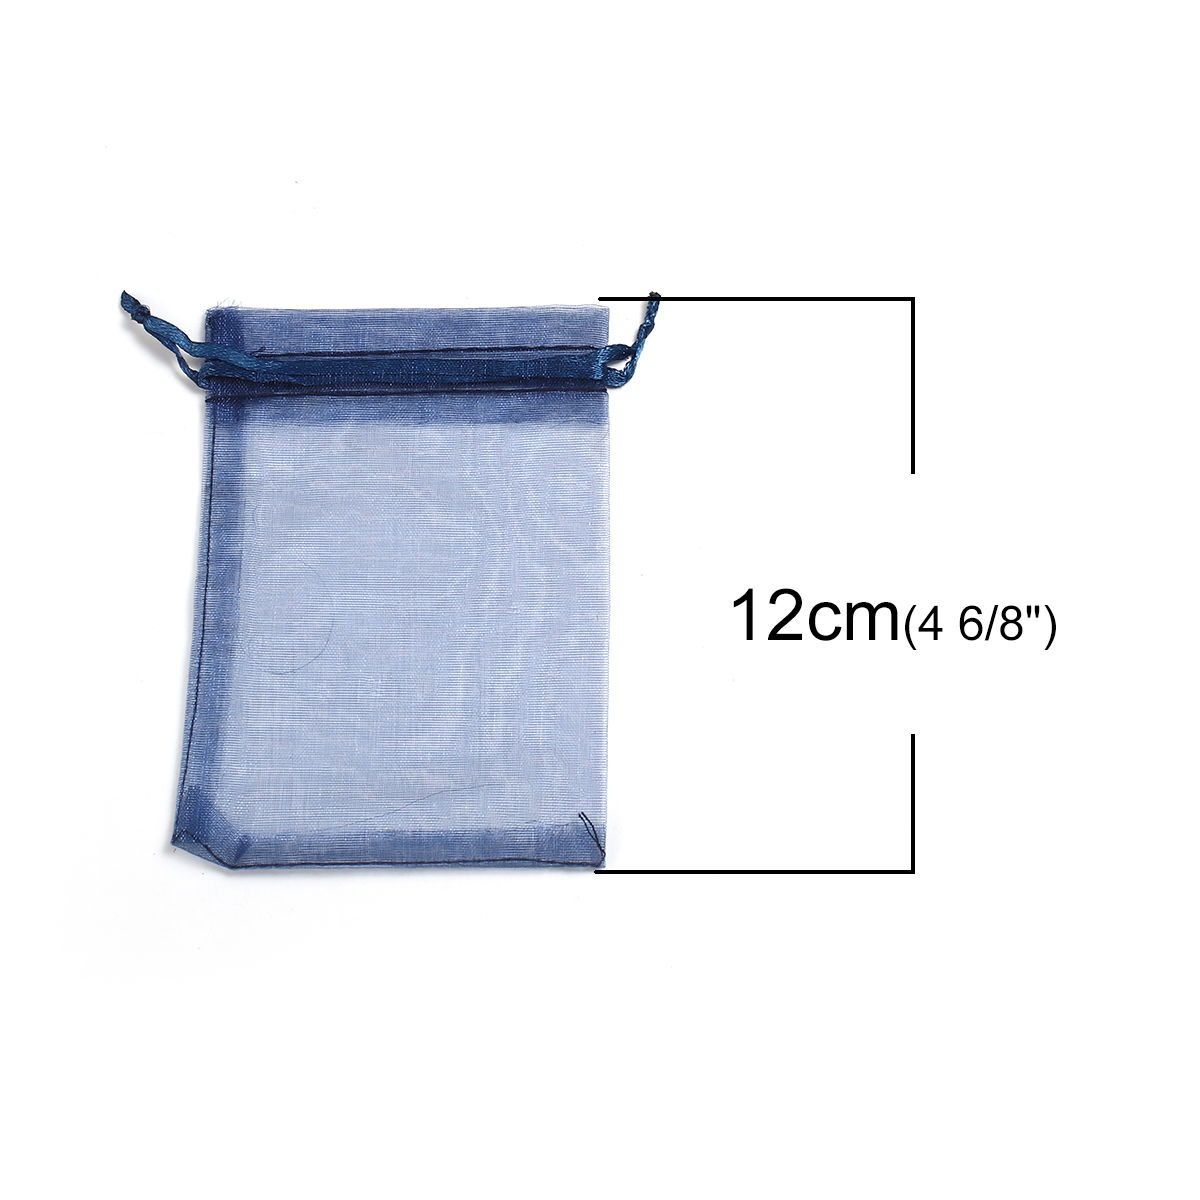 Picture of Wedding Gift Organza Jewelry Bags Drawstring Rectangle Navy Blue (Usable Space: 9.5x9cm) 12cm(4 6/8") x 9cm(3 4/8"), 50 PCs